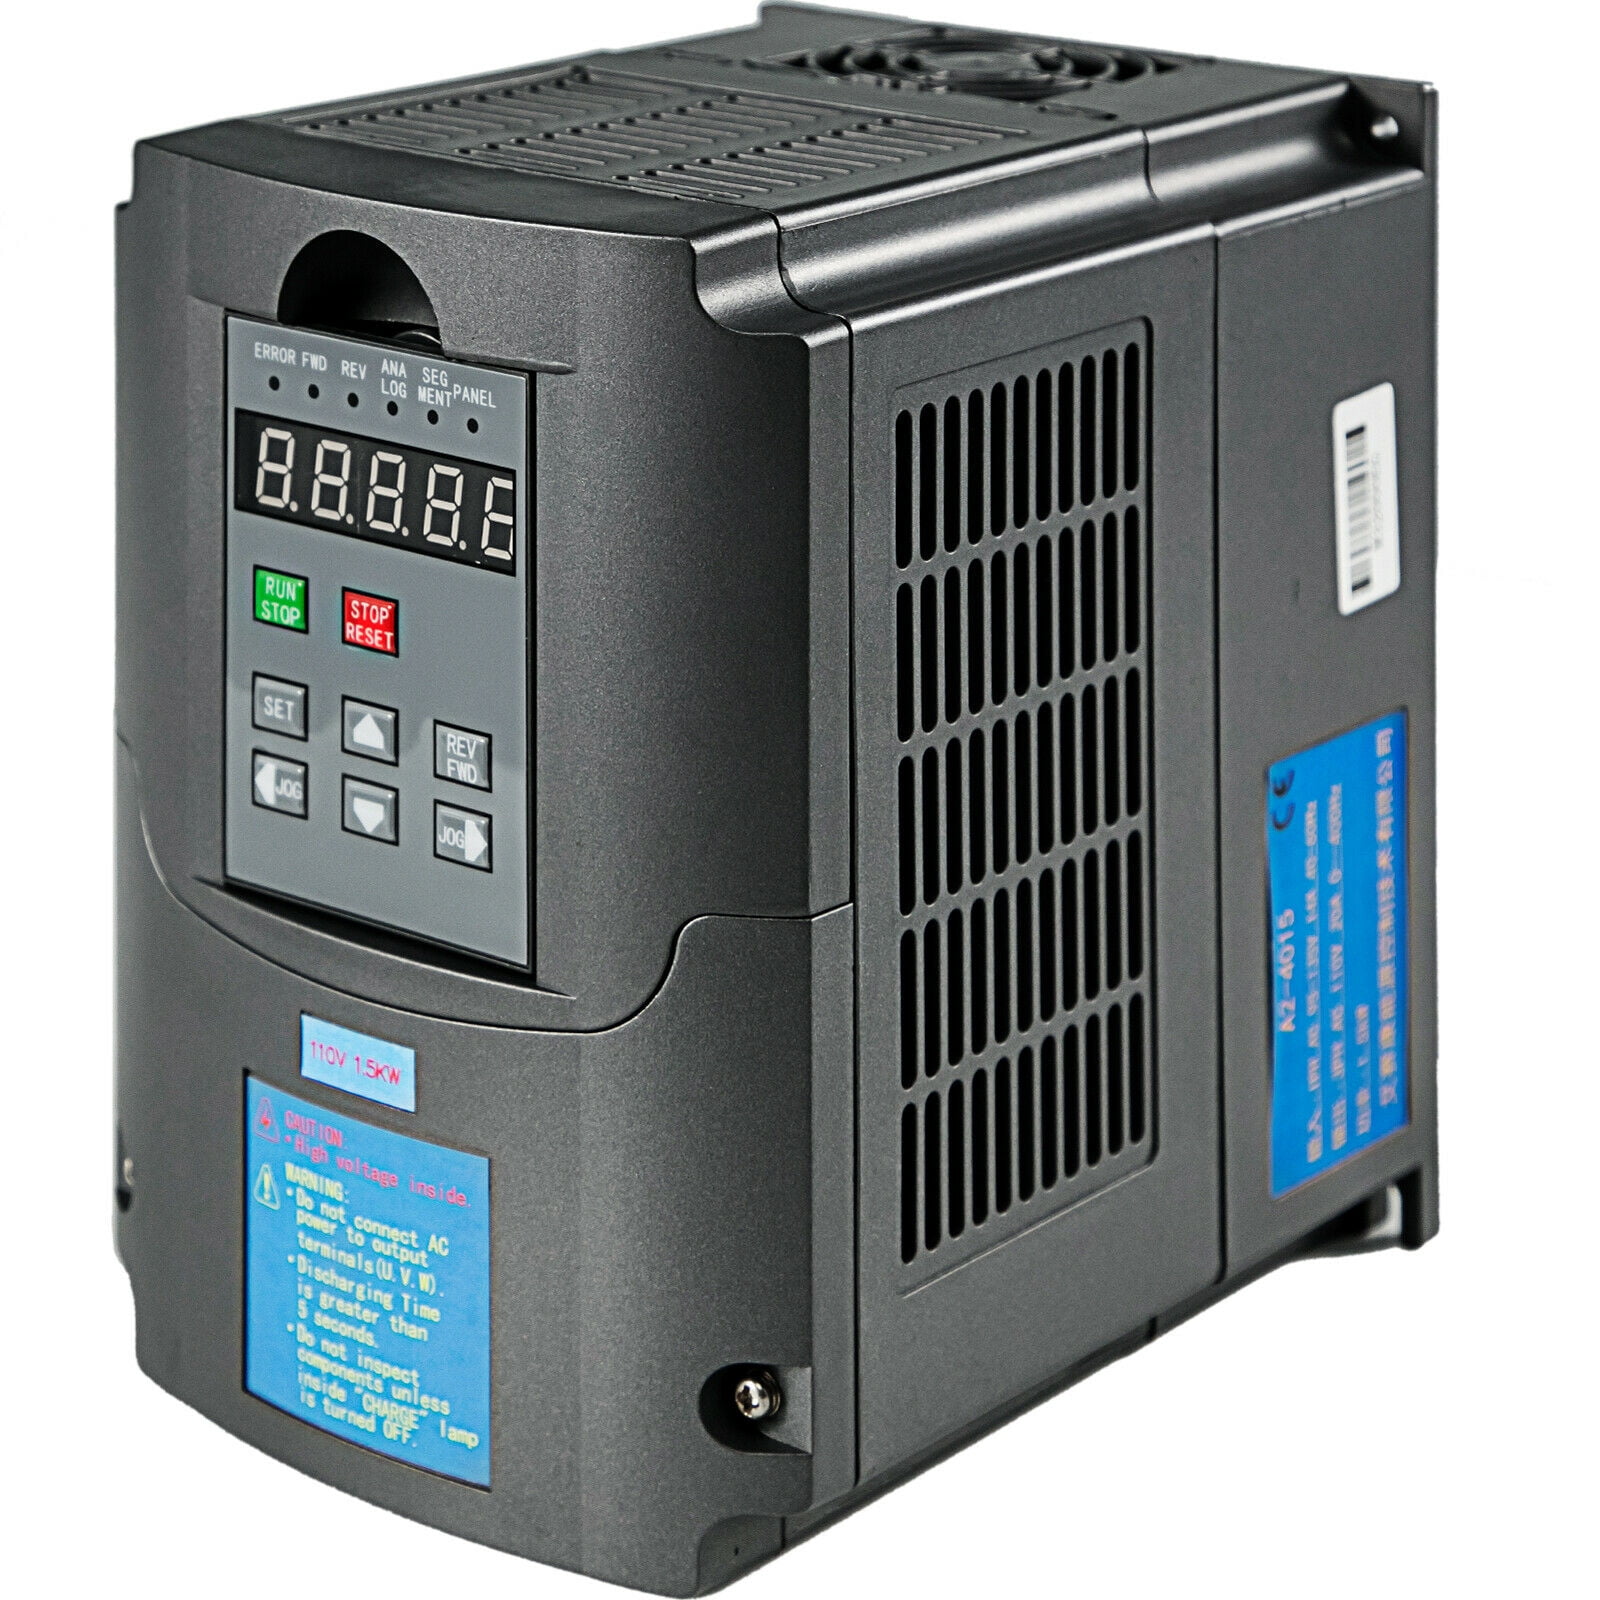 AC110V 2.2KW Variable Frequency Drive Inverter Vector Motor Speed Control Filter 